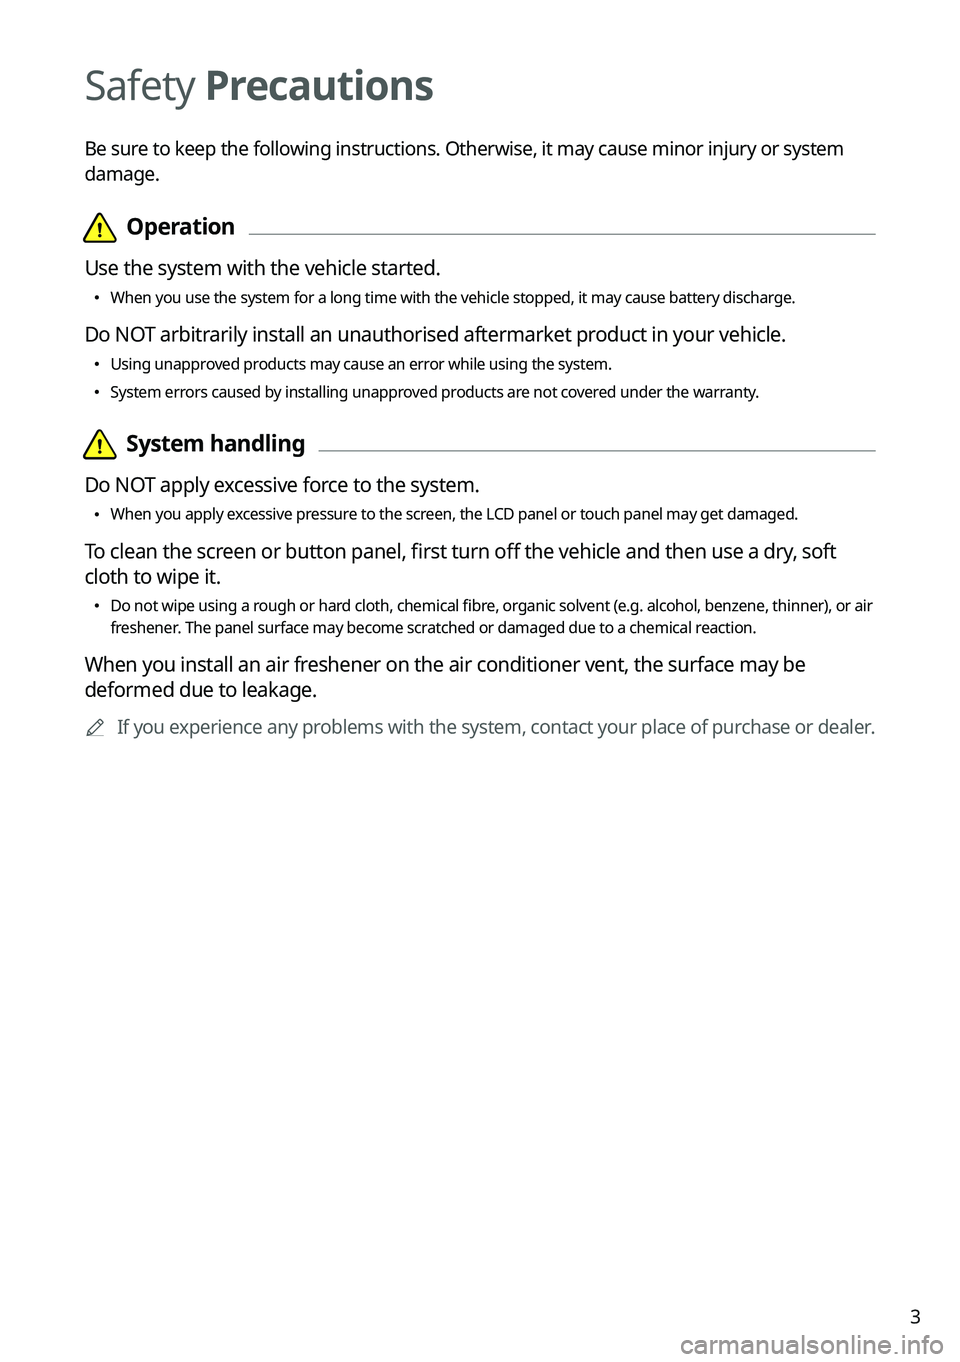 KIA SPORTAGE PHEV 2023  Navigation System Quick Reference Guide 3
Safety Precautions
Be sure to keep the following instructions. Otherwise, it may cause minor injury or system 
damage. 
  